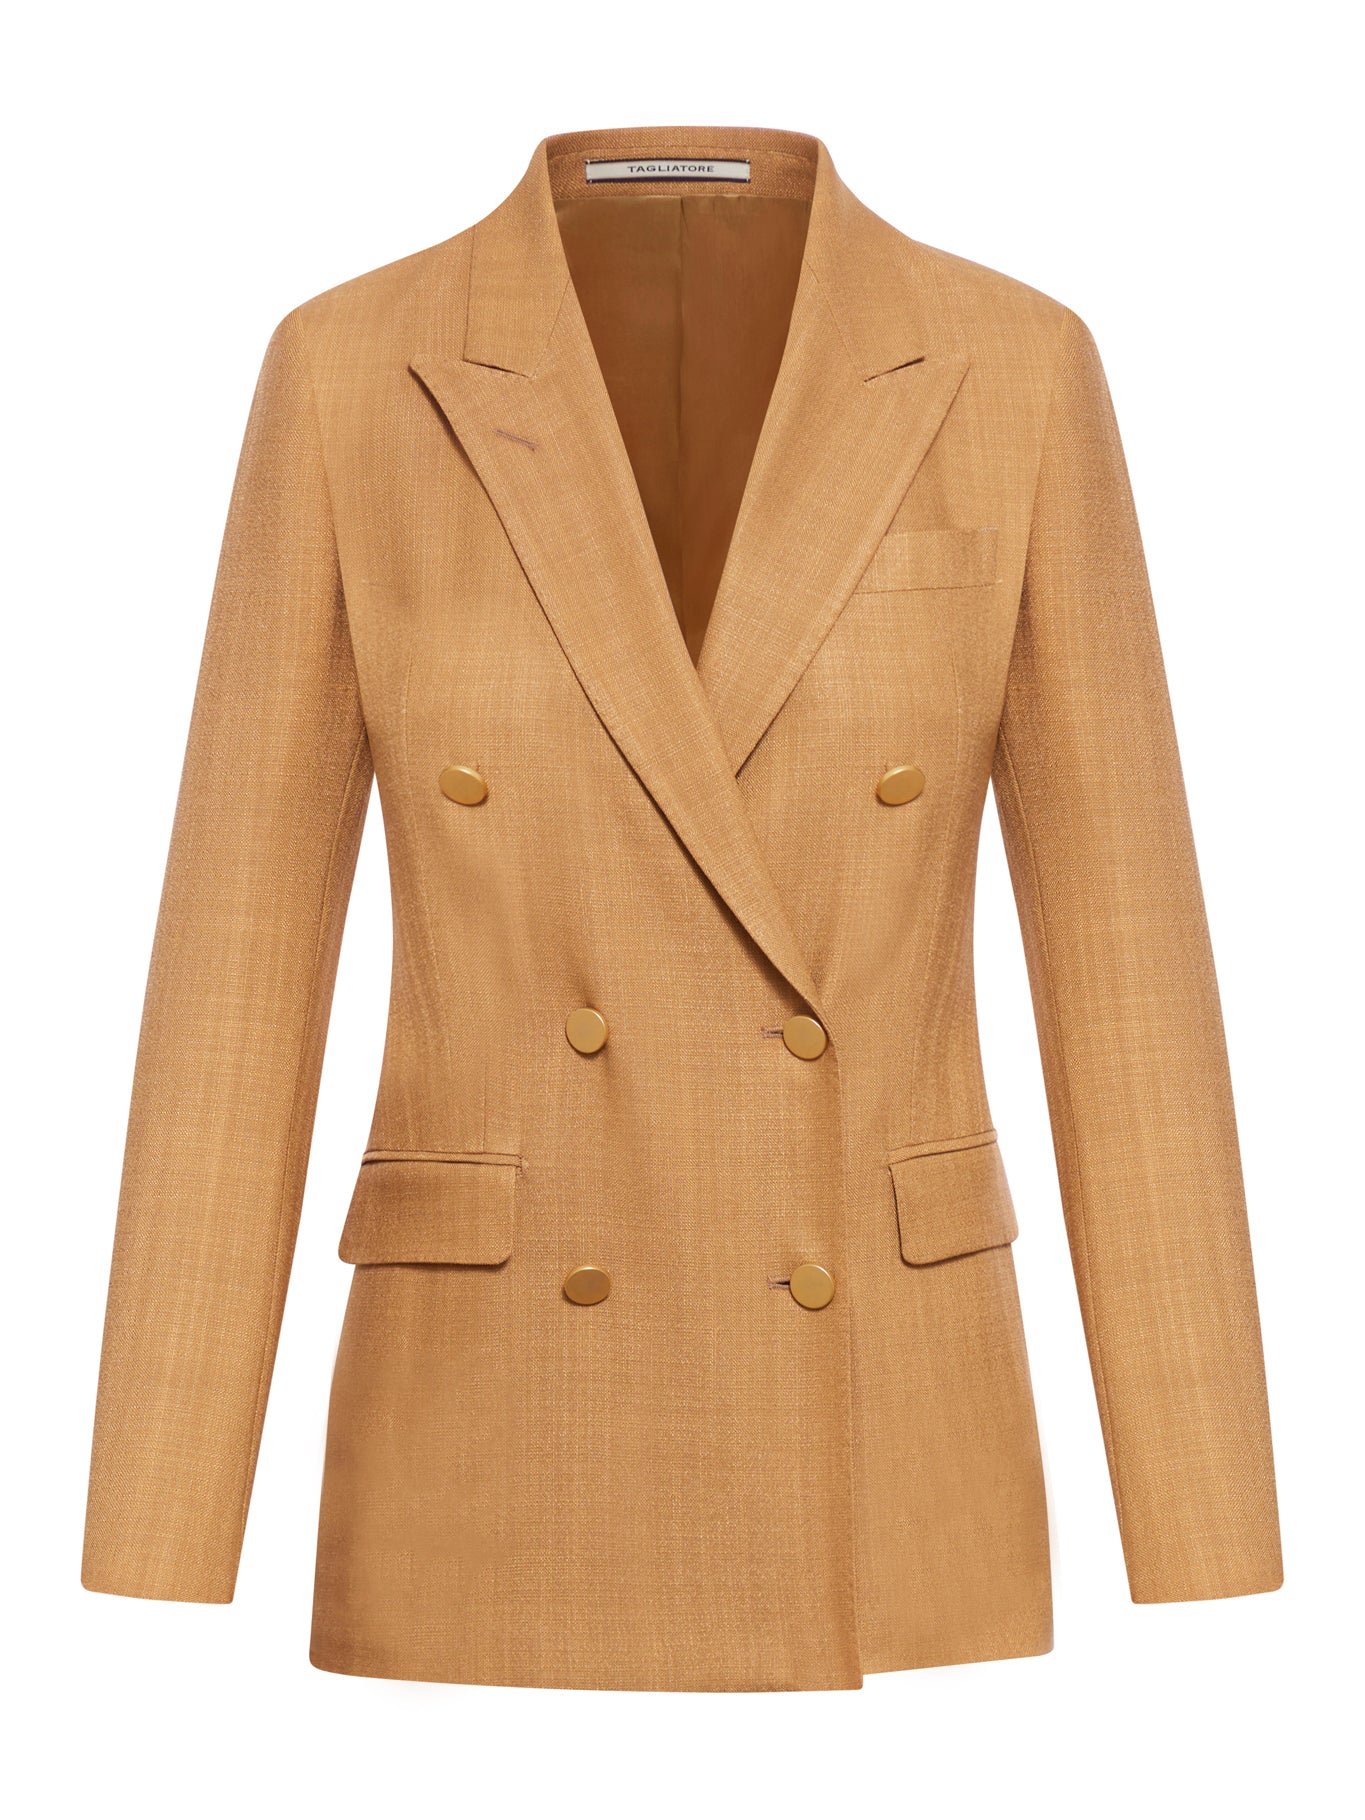 DOUBLE-BREASTED PARIGI JACKET IN COTTON